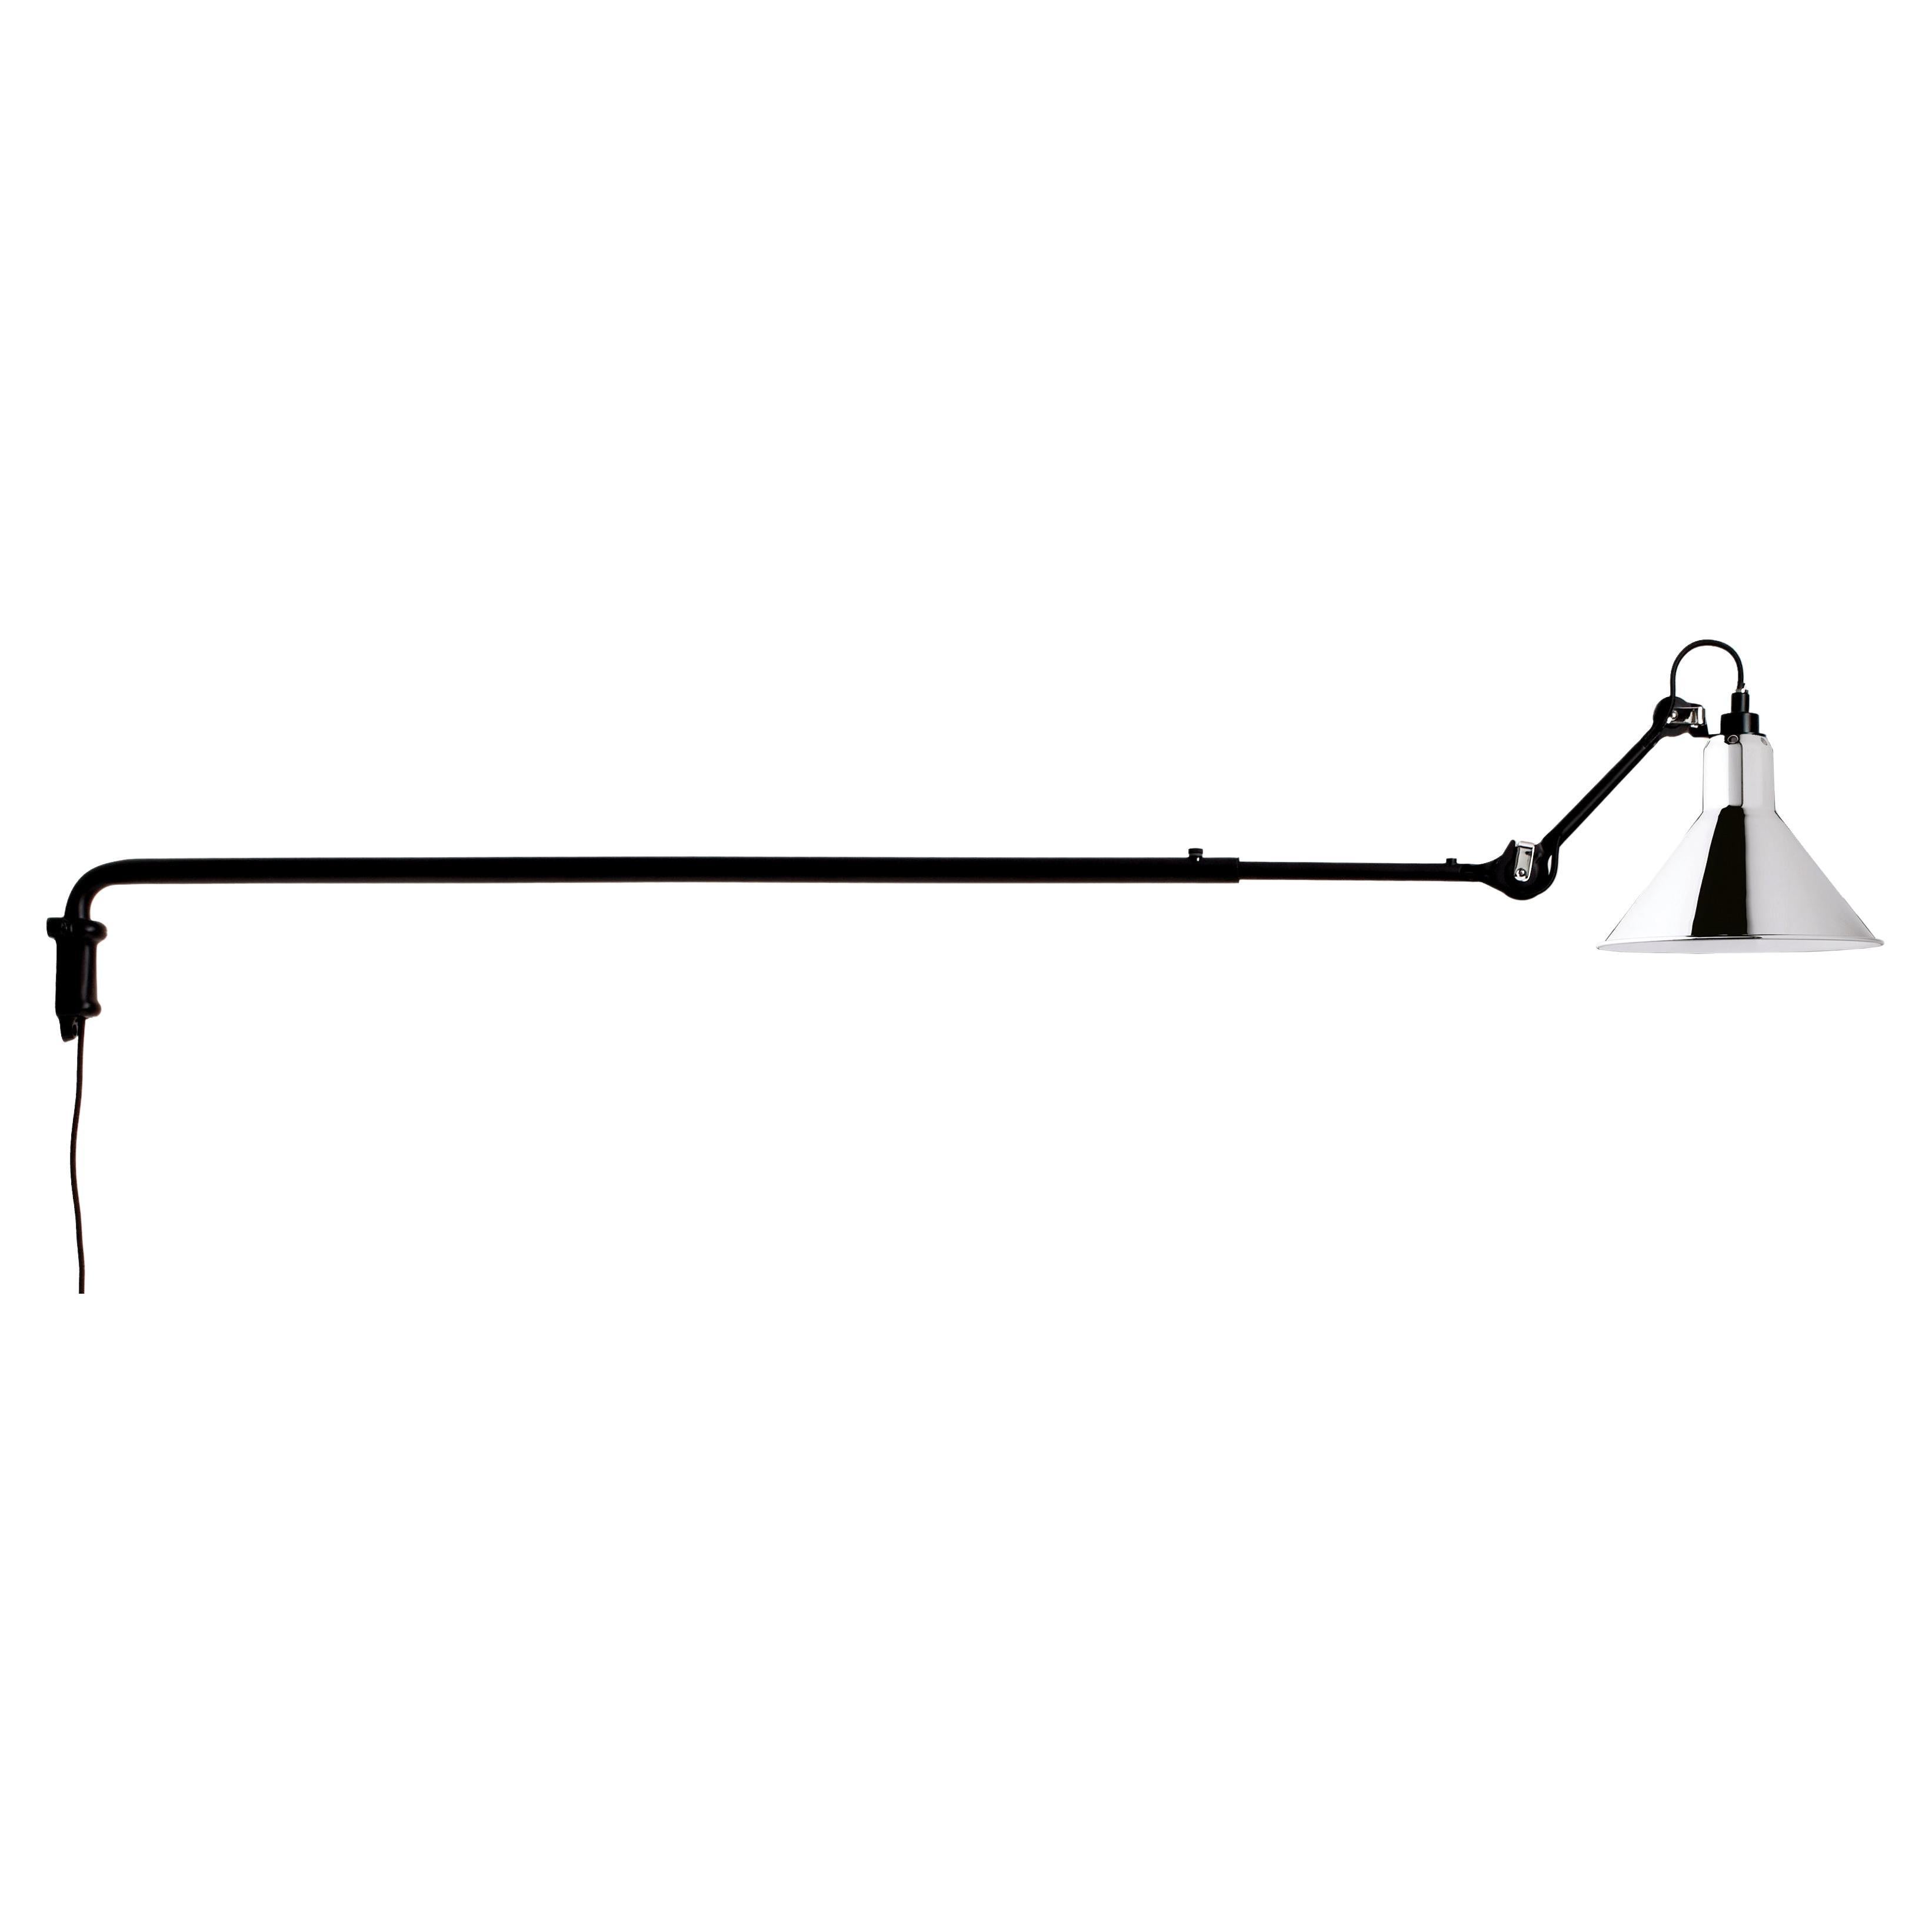 DCW Editions La Lampe Gras N°213 Wall Lamp in Black Arm and Chrome Shade